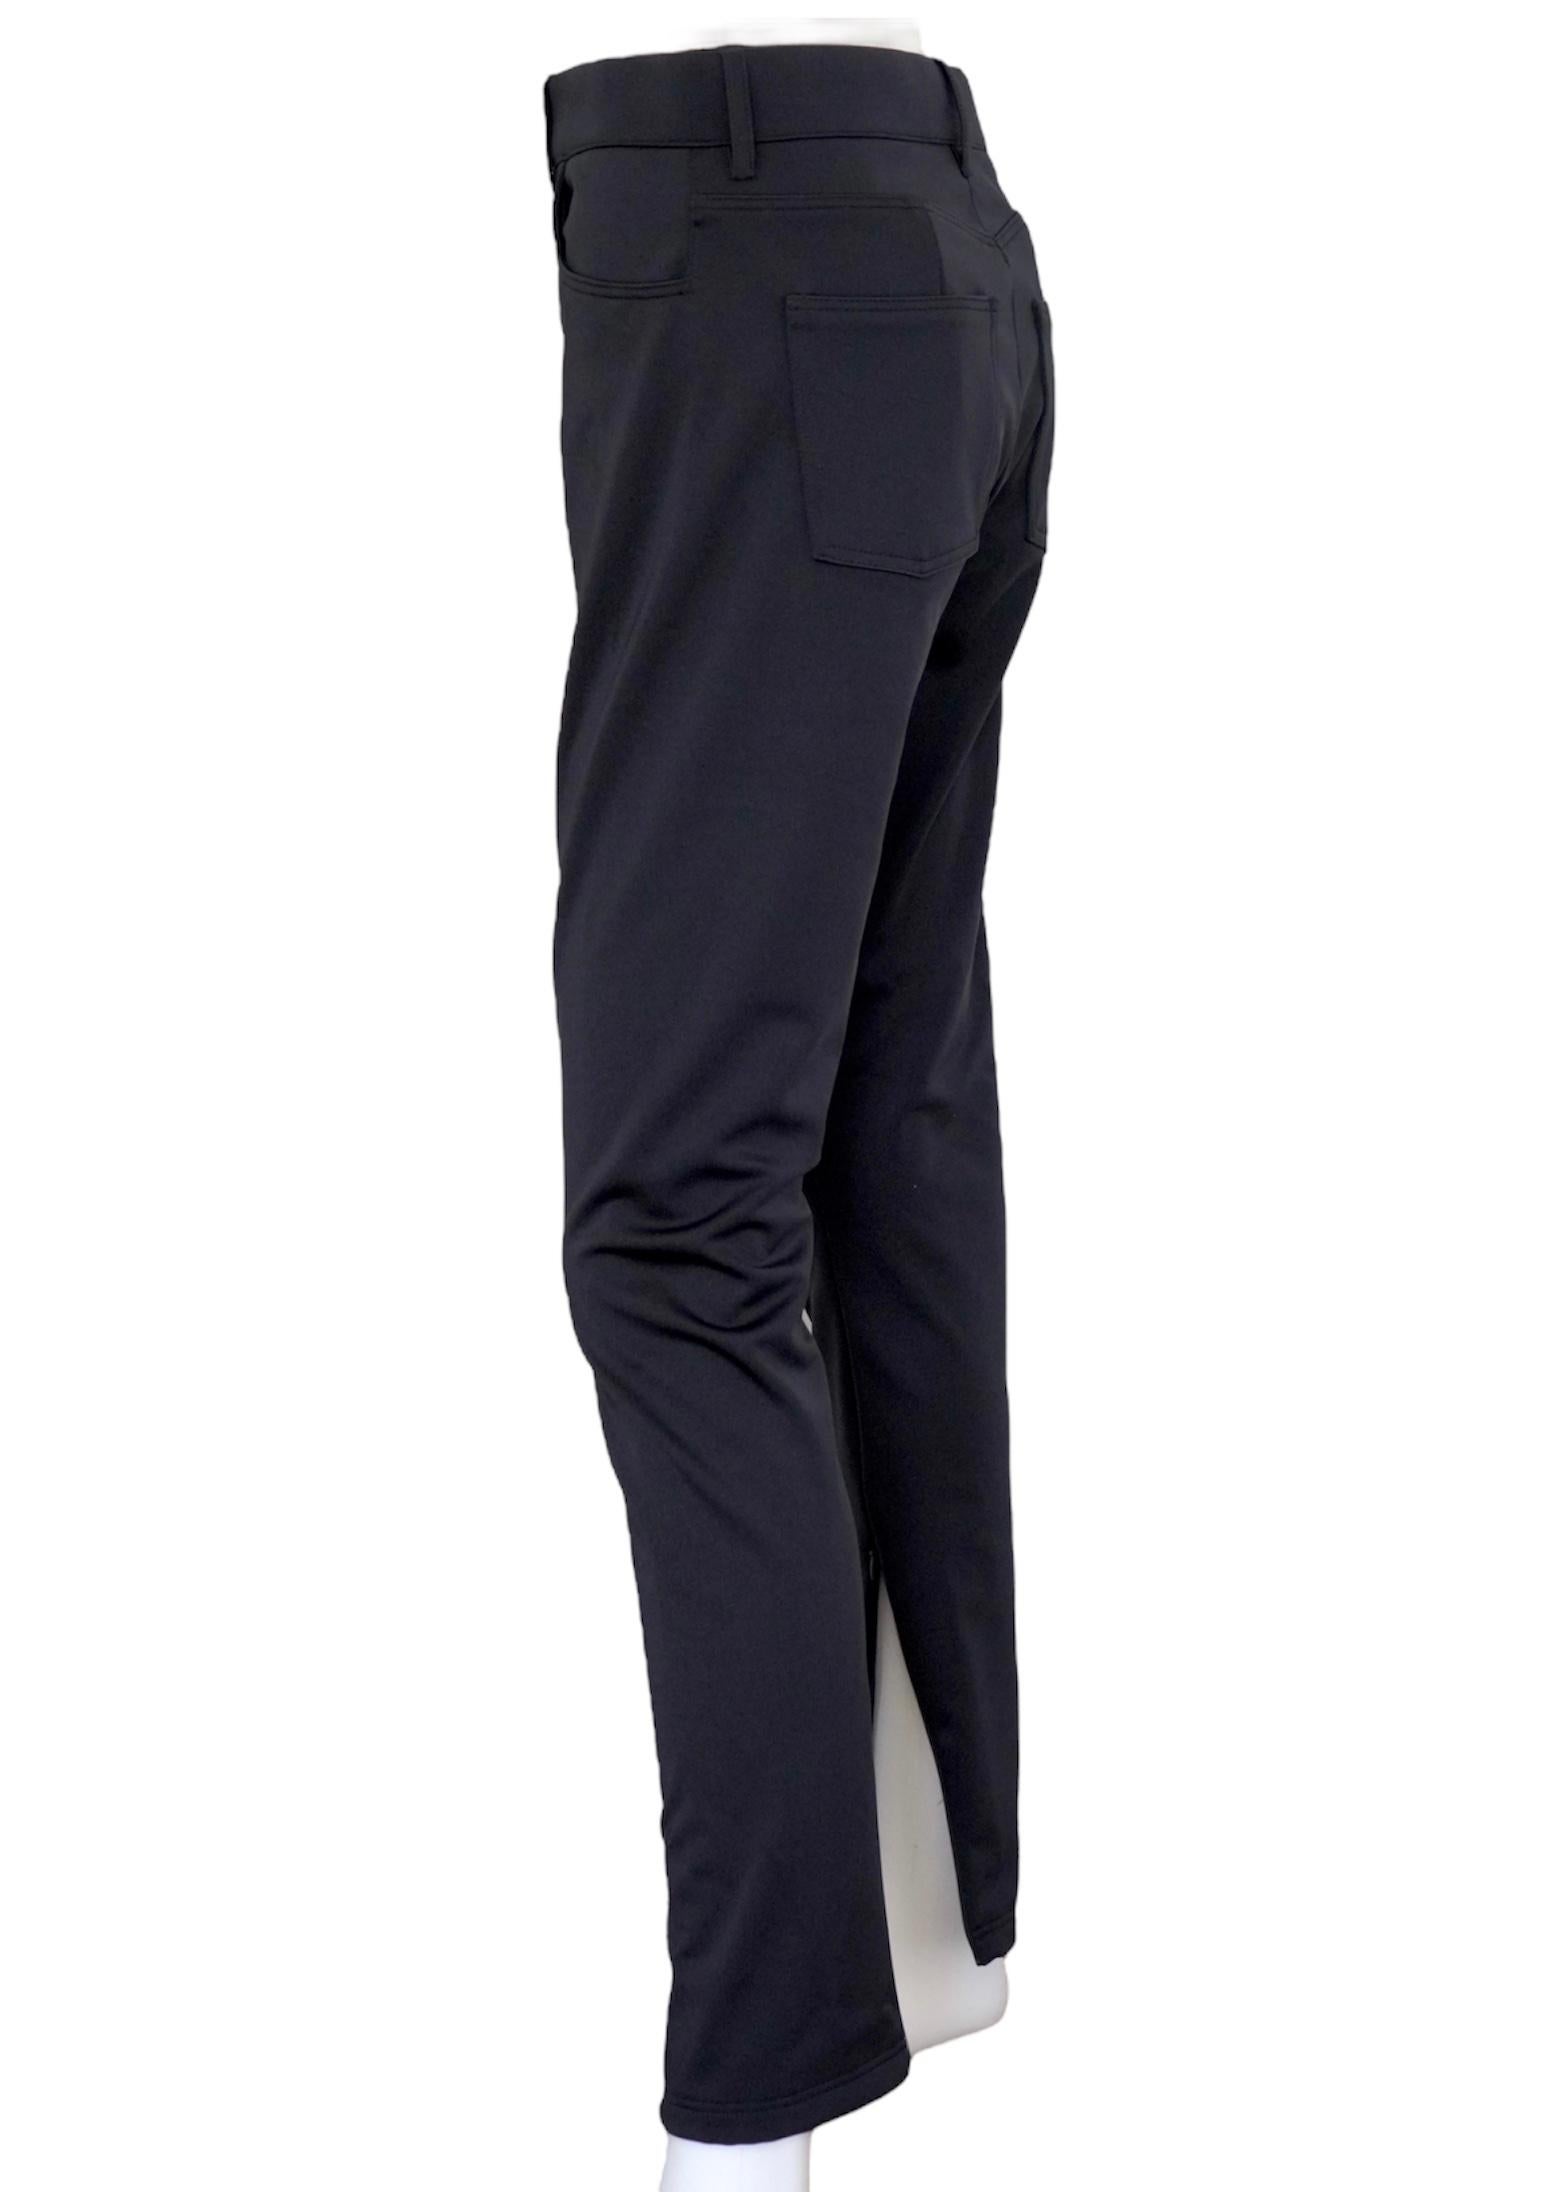 New Balenciaga Ankle Zip Black Pant. We have them in a sz 40. These pants feature an ankle zip on the inside of each pant leg. They also have a sleek stretch material. Three front and two back pockets. The perfect work pant, or dress it up and wear